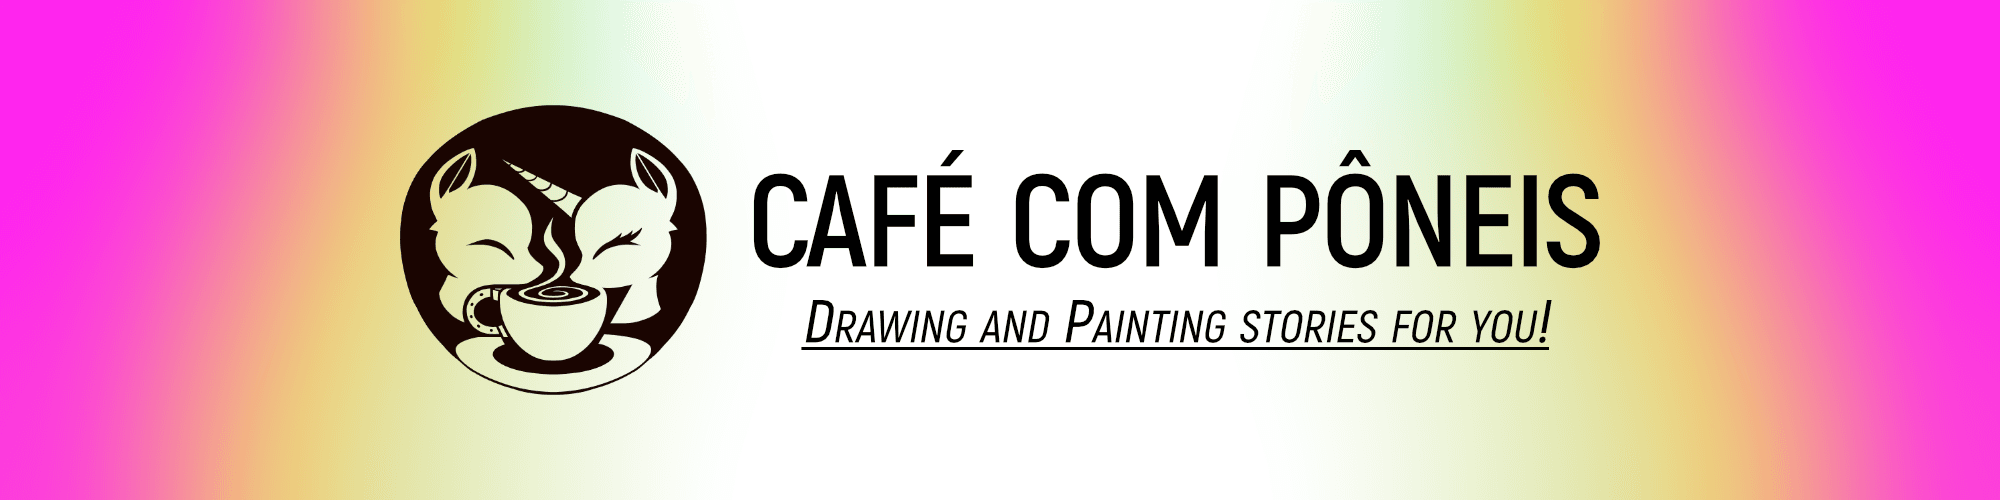 Cafecomponeis banner